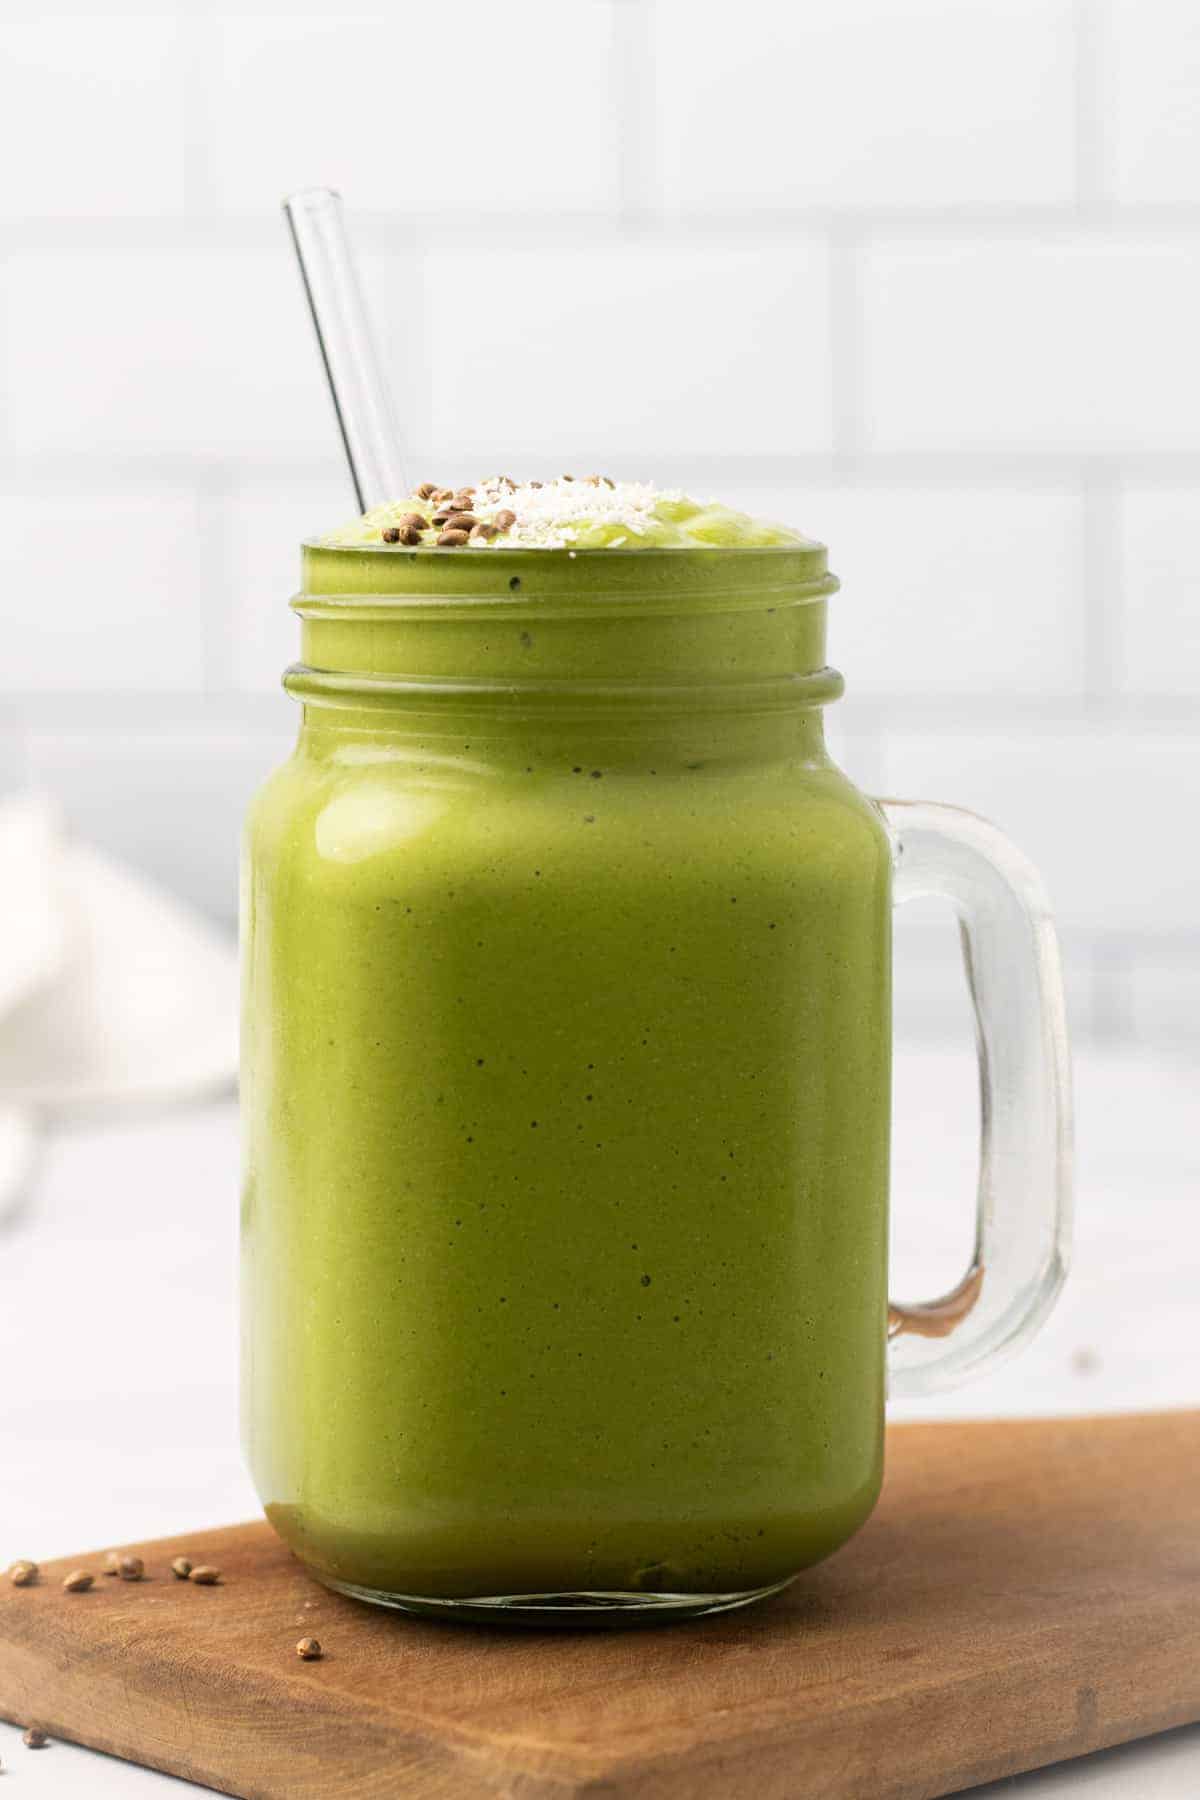 Side view of smoothie in a glass mug with a glass straw sticking out of the top